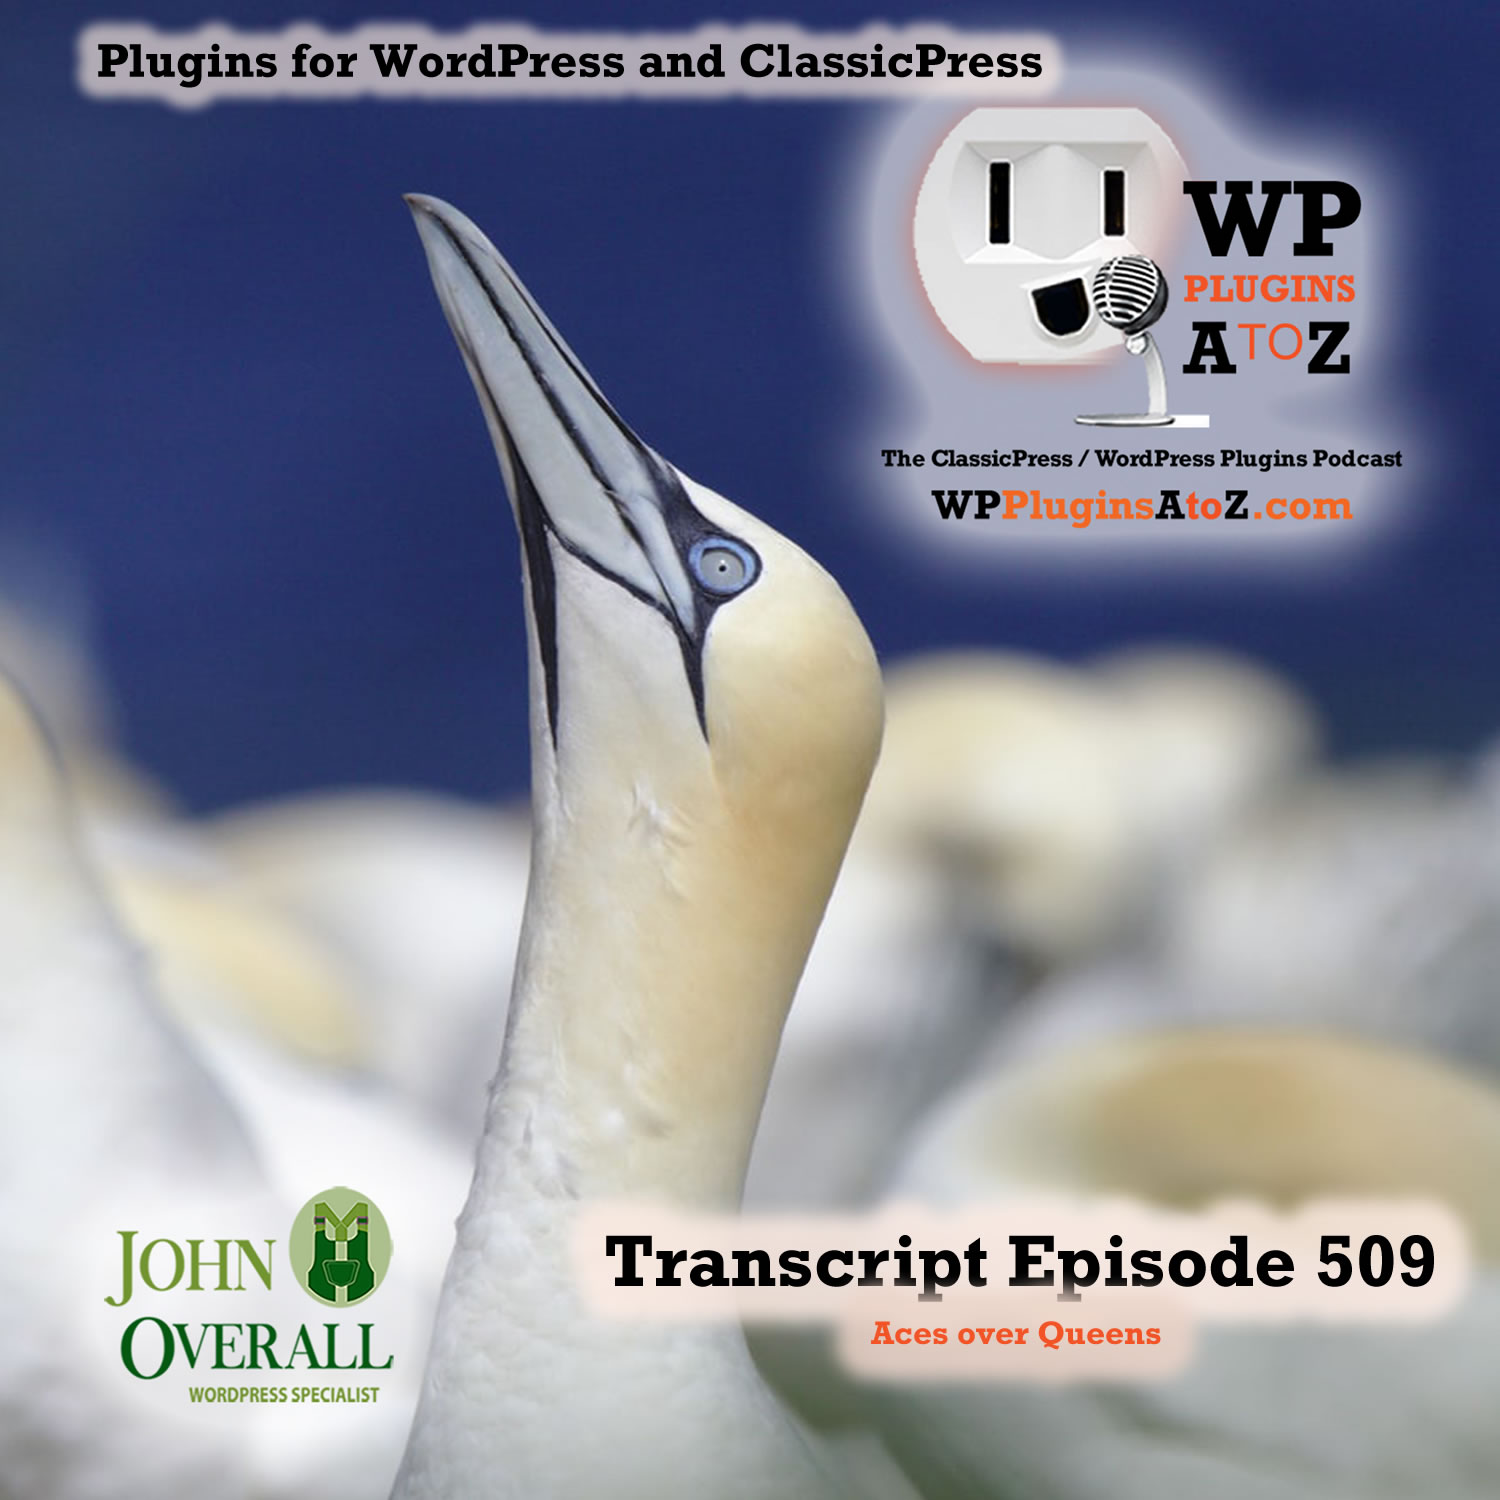 Aces over Queens It's Episode 509 - We have plugins for Mail Tracking, Business Directory, Migrations, Custom user Profiles, Registration Management, and ClassicPress Options. It's all coming up on WordPress Plugins A-Z!